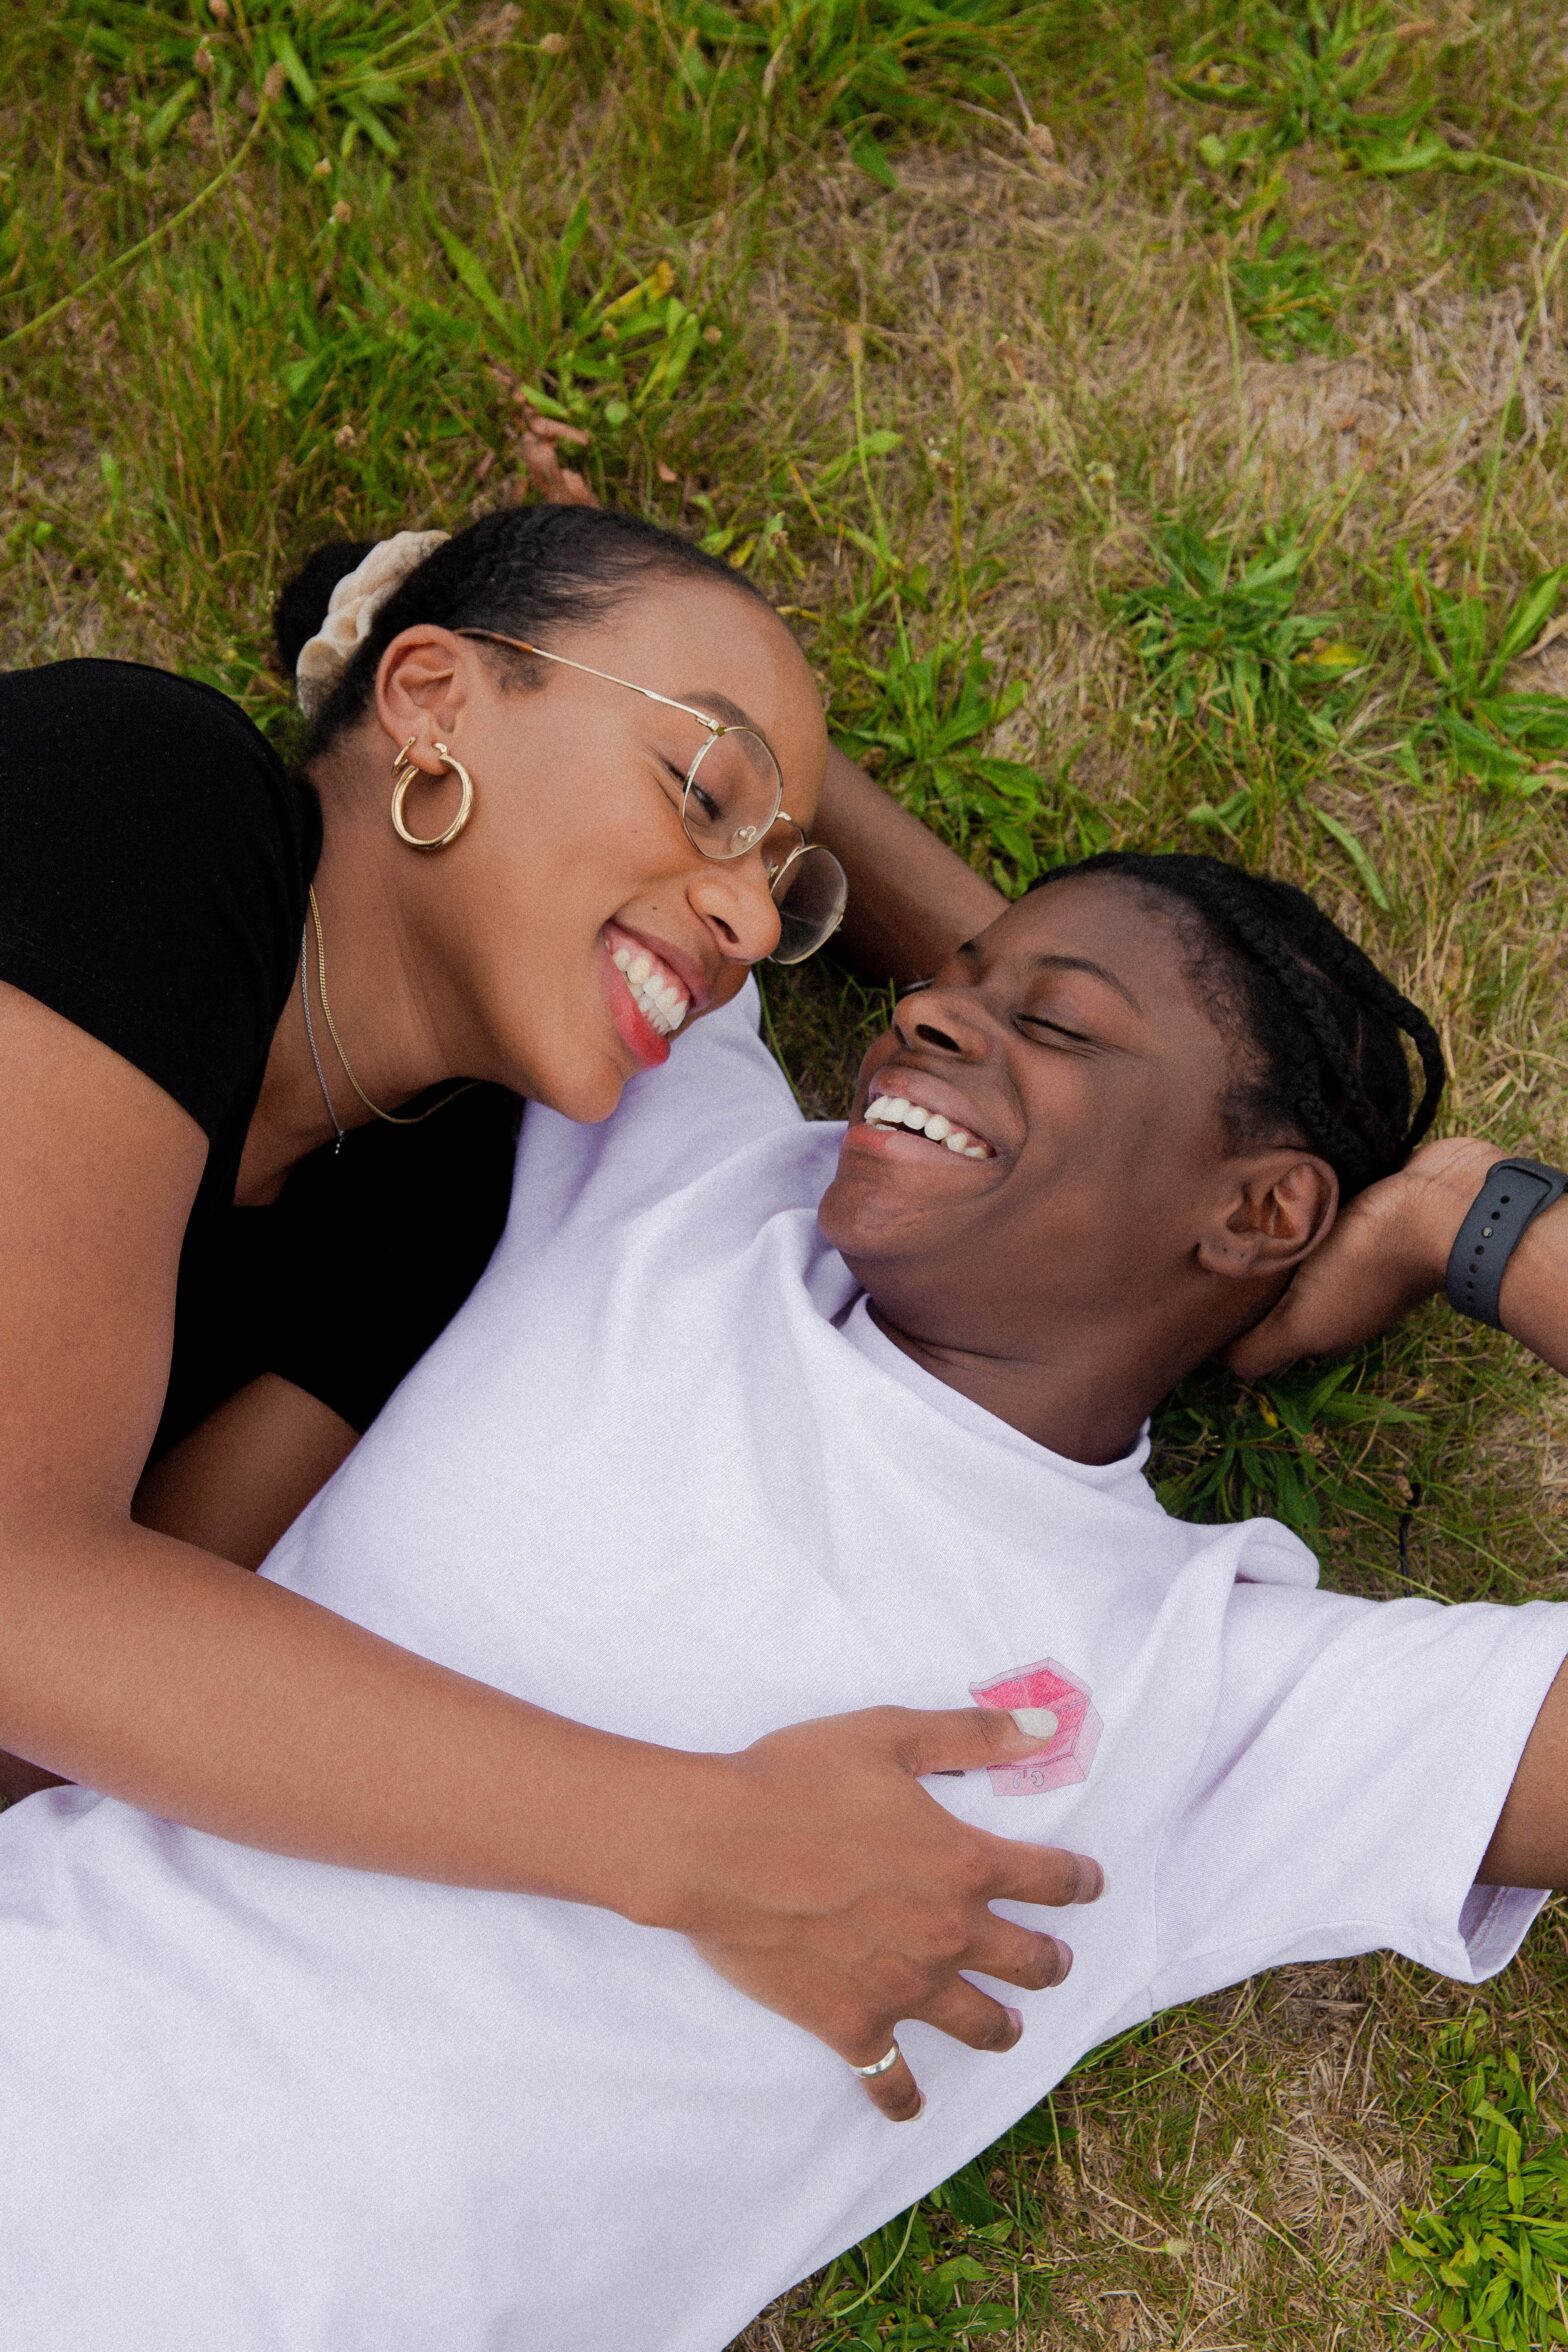 is it infatuation vs love? pictured: smiling couple cuddling